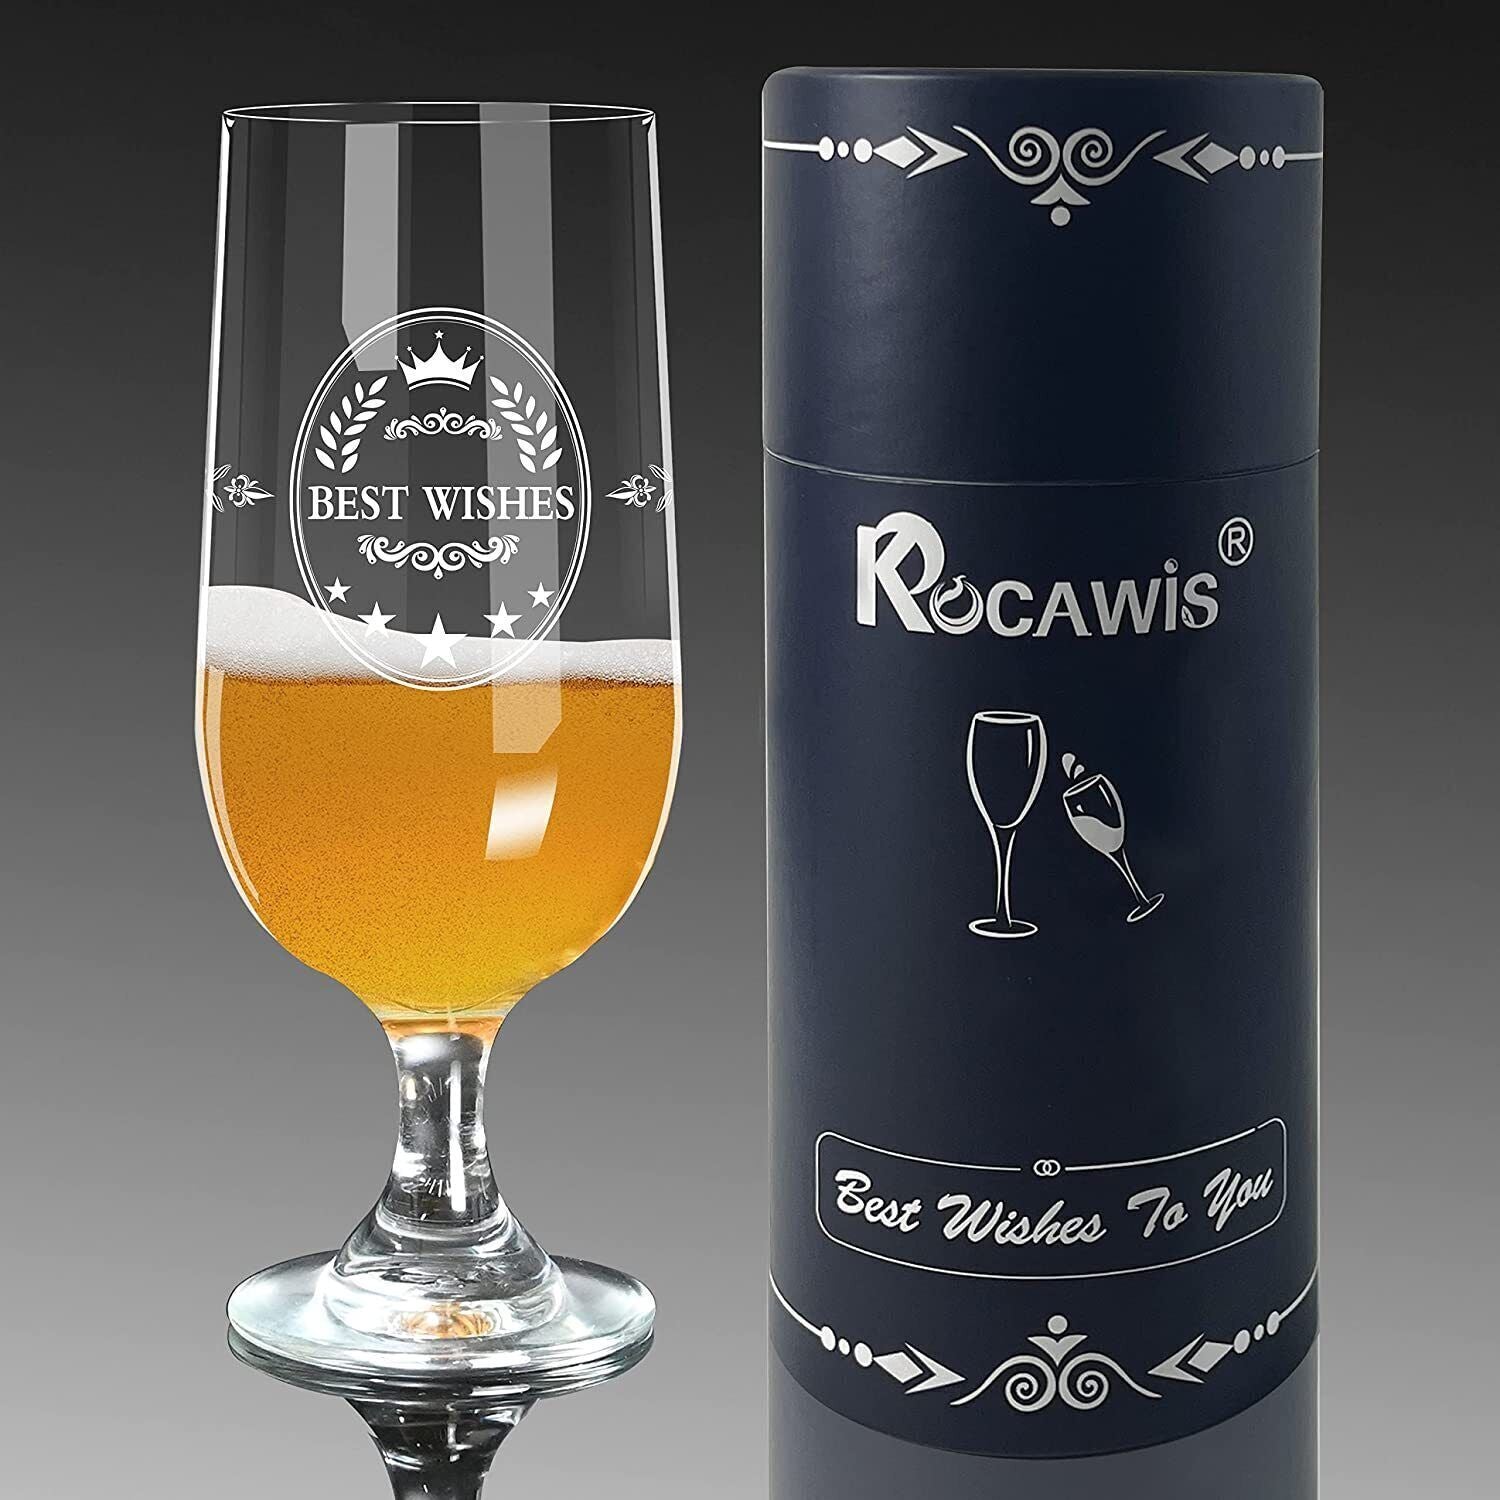 KOCAWIS BEER ALE GLASS GIFT FOR MEN DAD GRANDFATHER UNCLE TULIP 350ML - RLO Tech